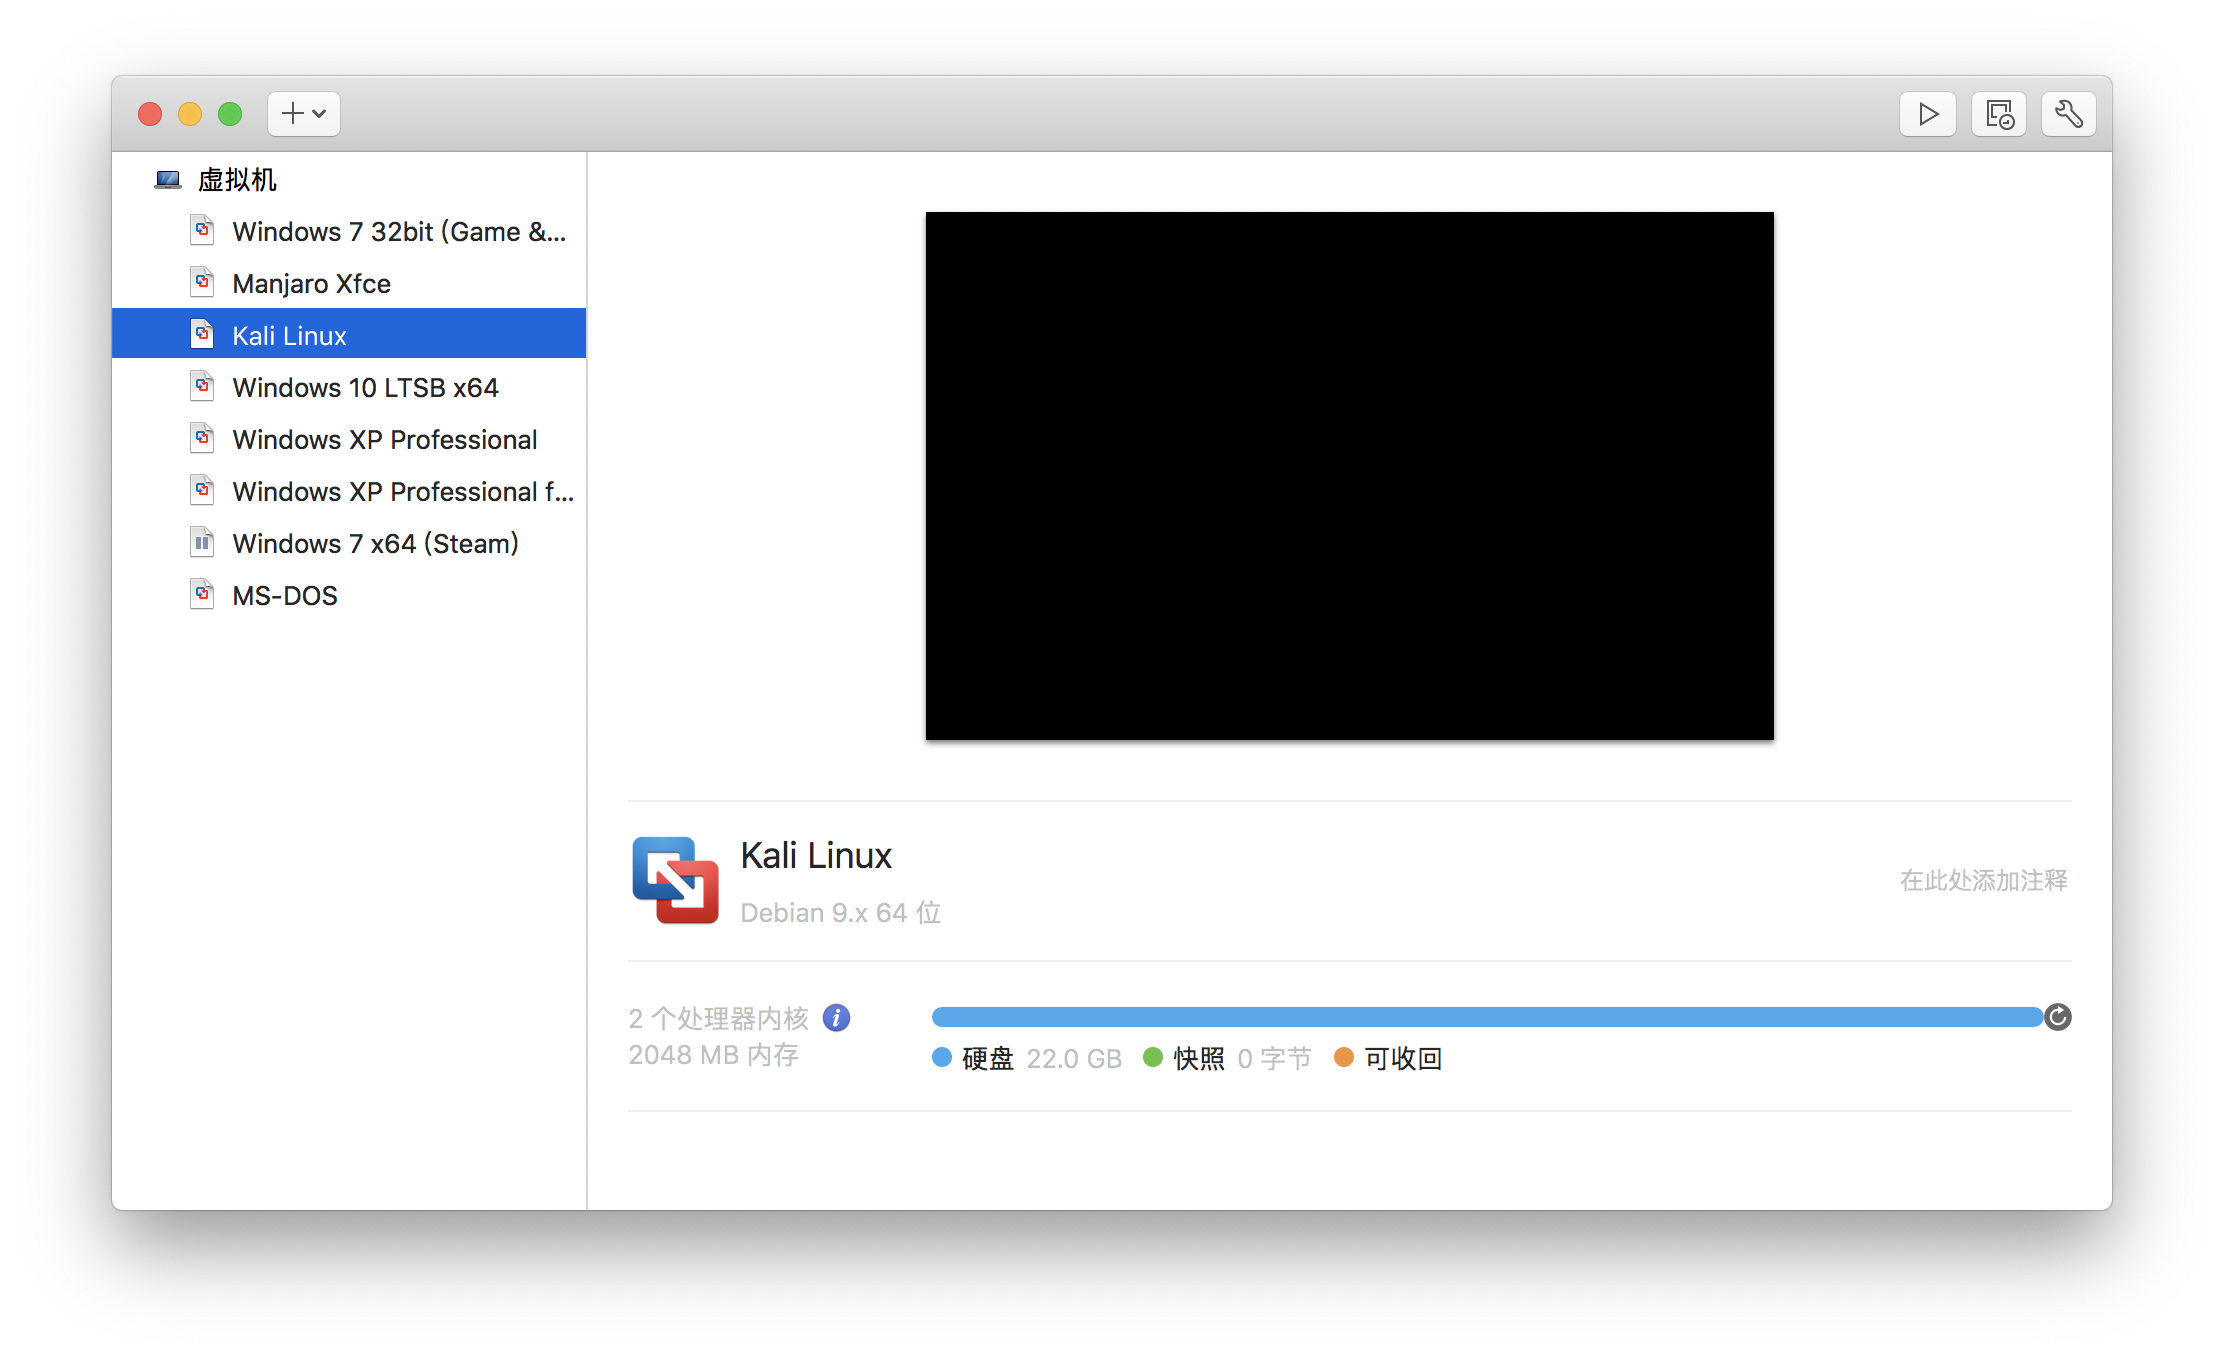 The Interface of VMware Fusion